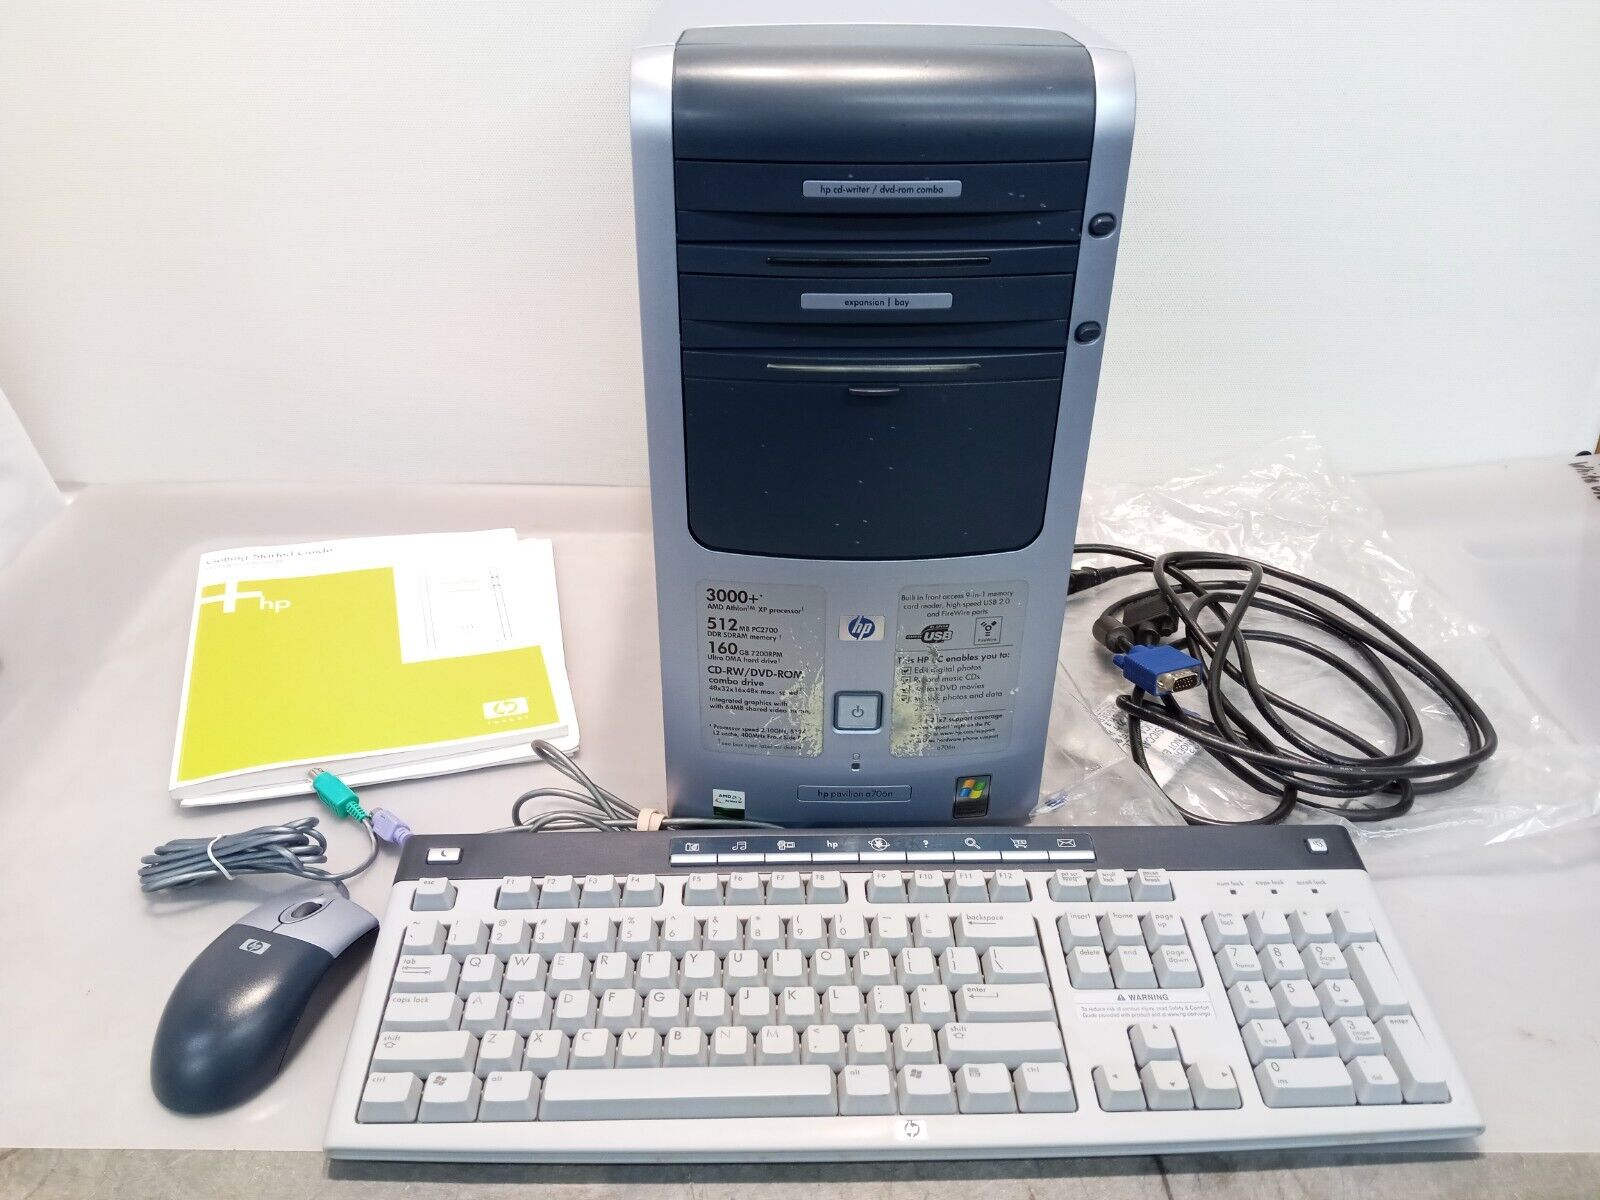 Vintage HP Pavilion a706n PC AMD Athlon 3000+2.1GHz 512MB 160GB CDRW WinXP with